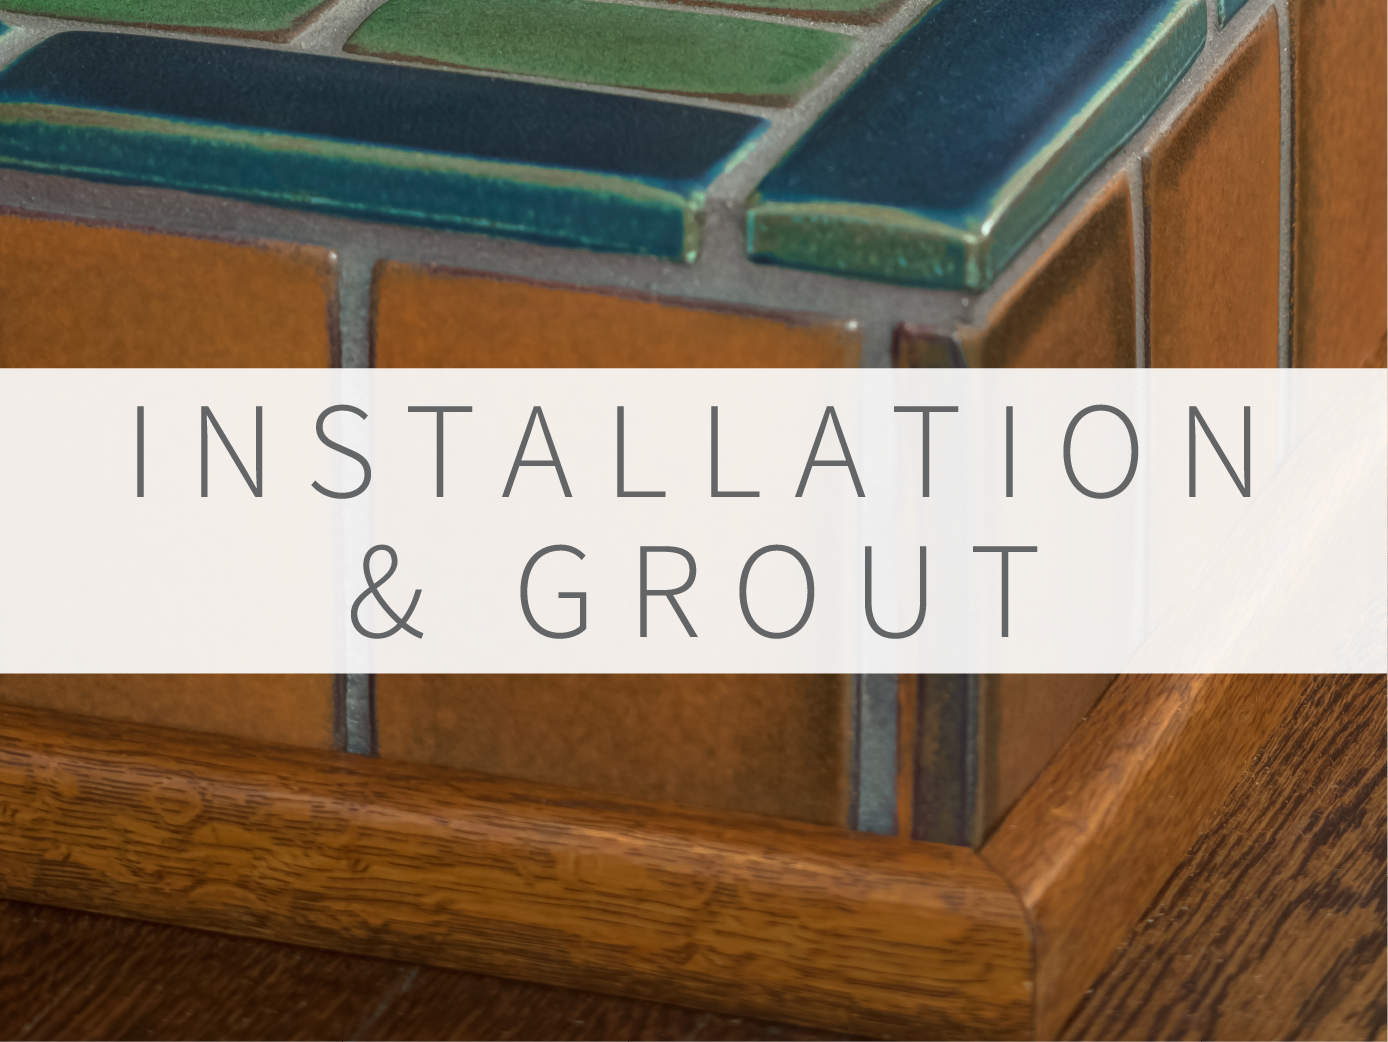 Installation & Grout